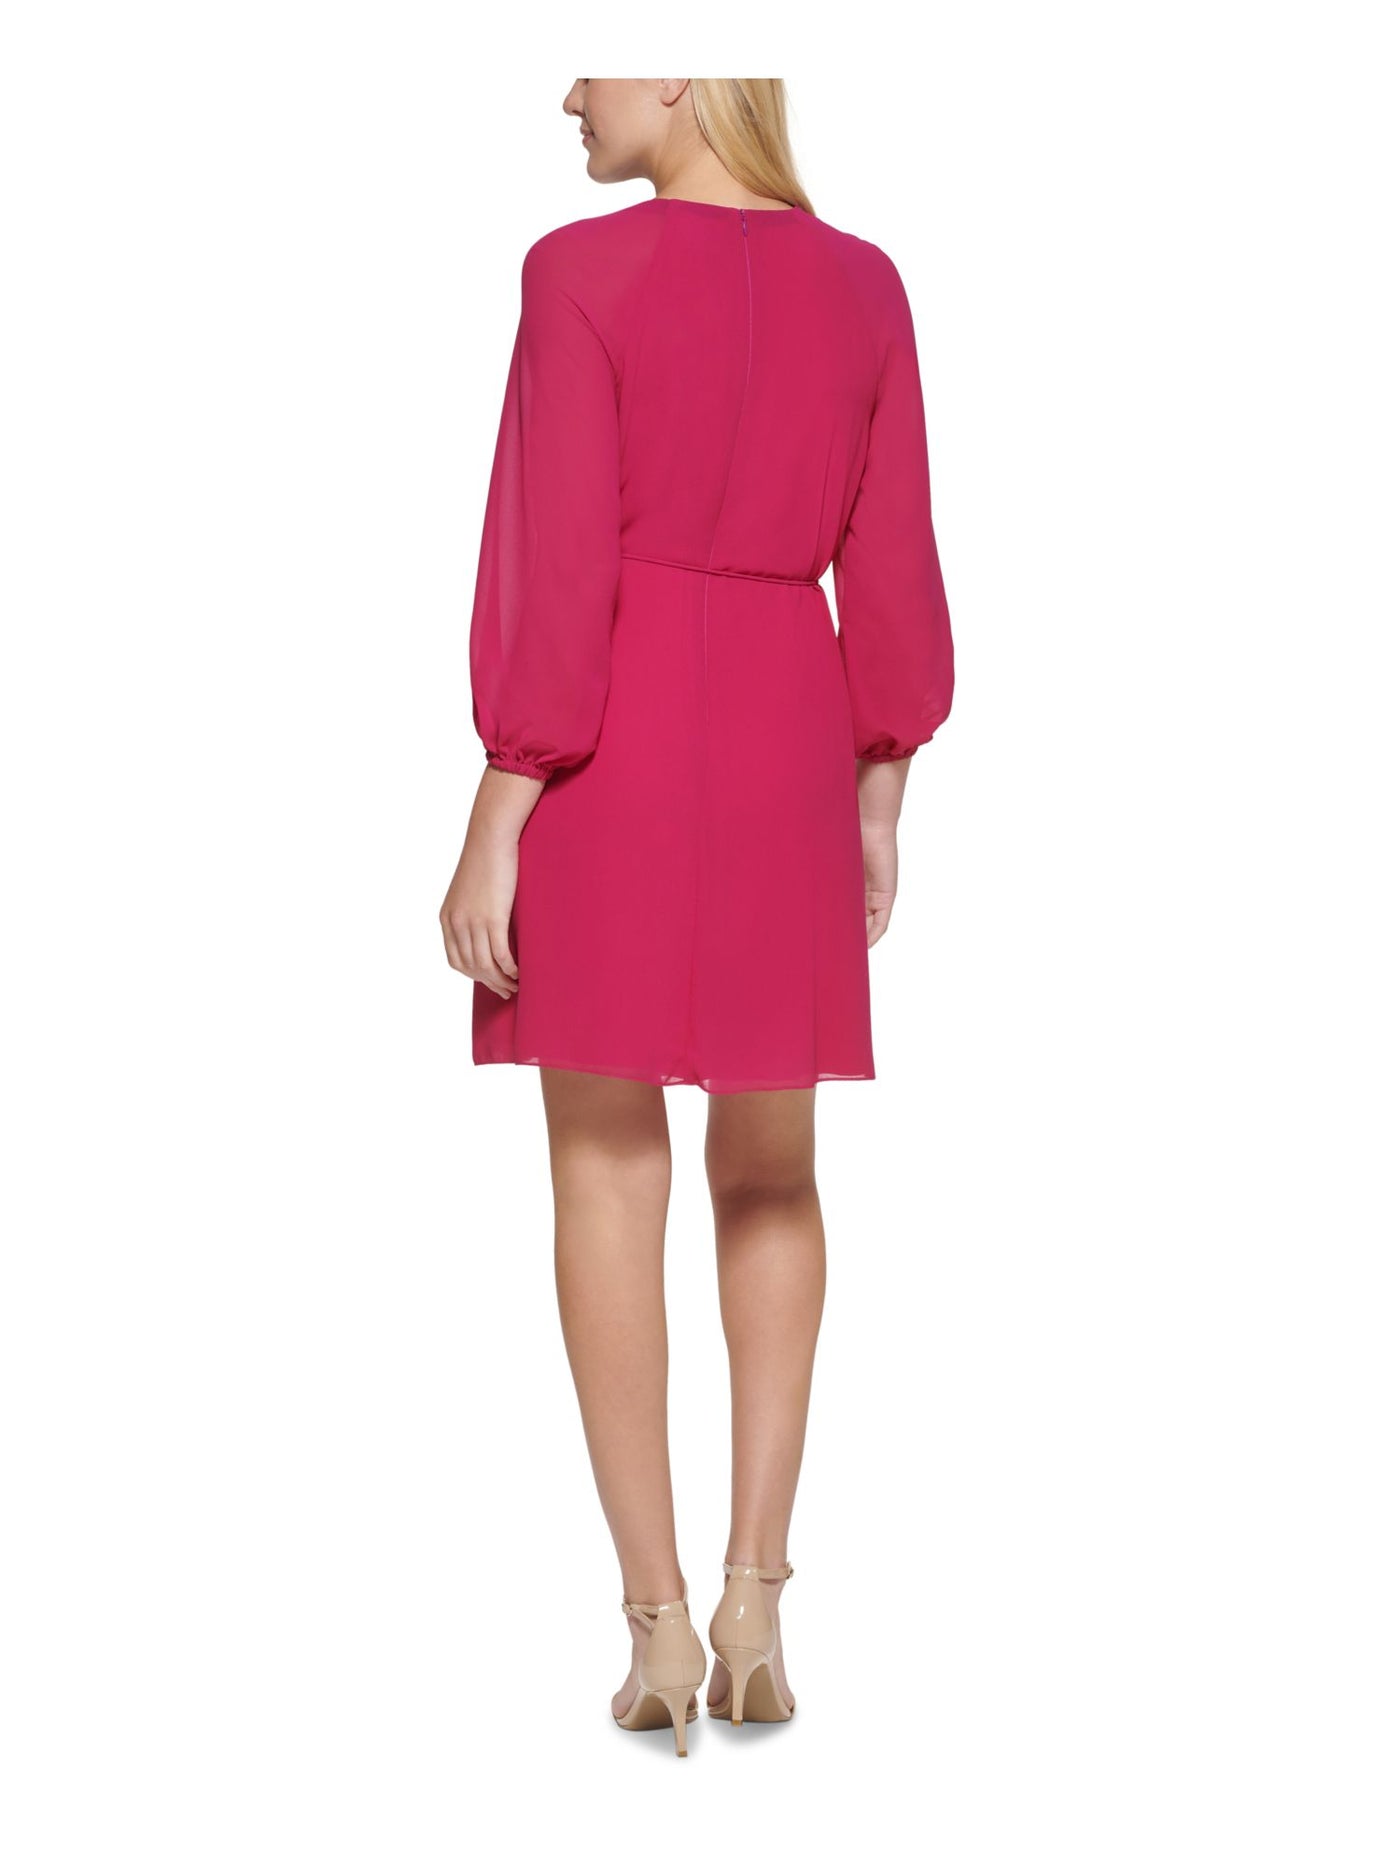 VINCE CAMUTO Womens Pink Tie Zippered Gathered Lined Blouson Sleeve Jewel Neck Above The Knee Wear To Work Sheath Dress Petites 6P